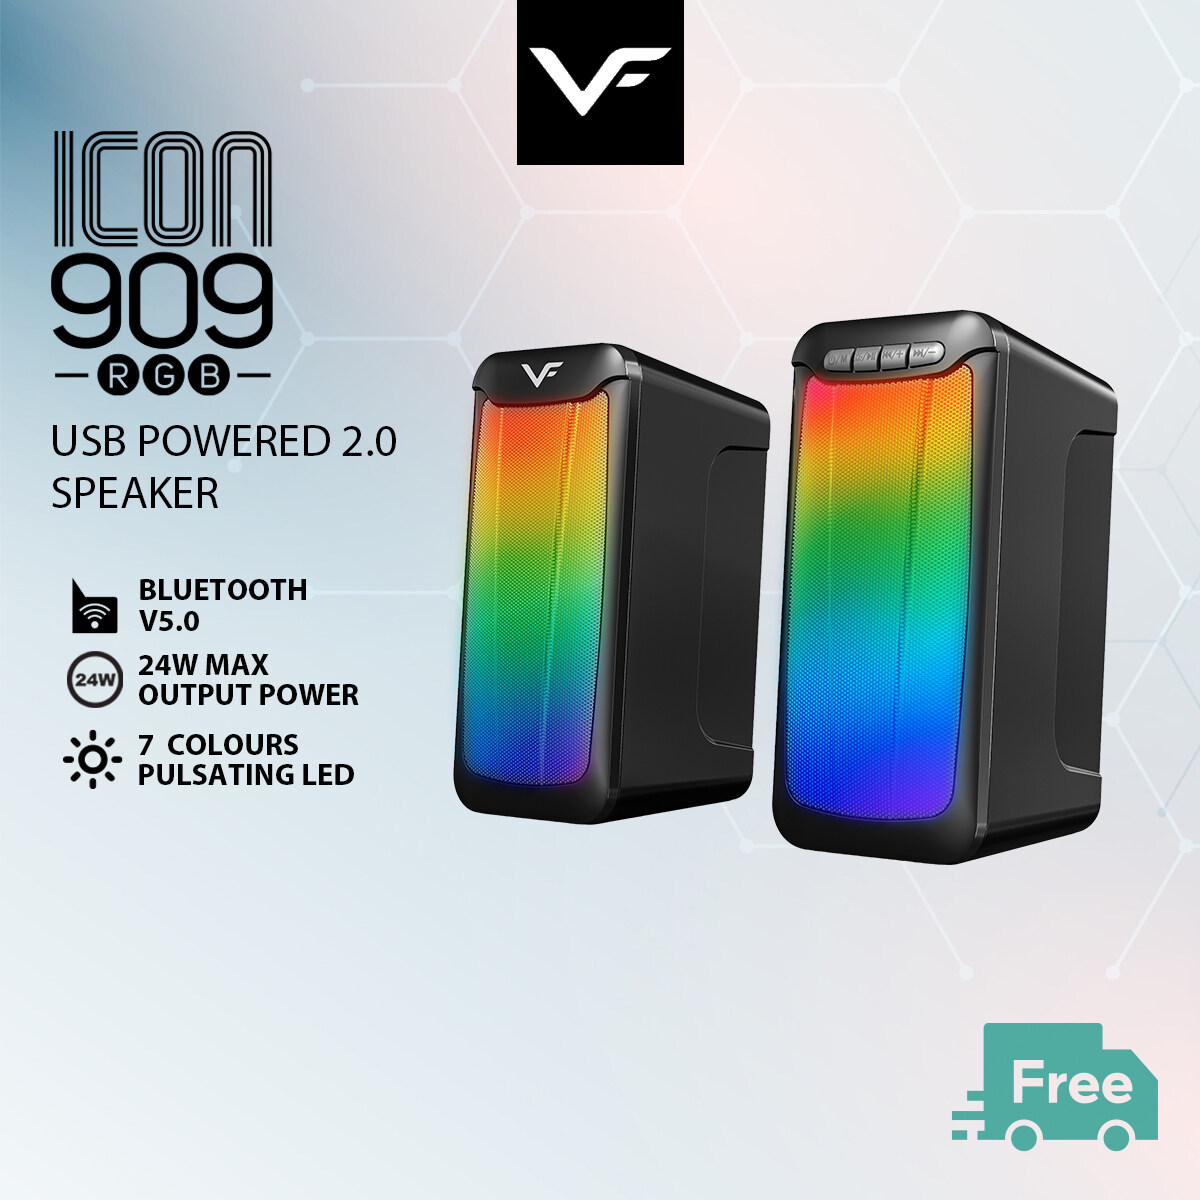 Vinnfier VF Icon 909 RGB Bluetooth USB Speaker with 7 Modes LED Lights Aux Line in